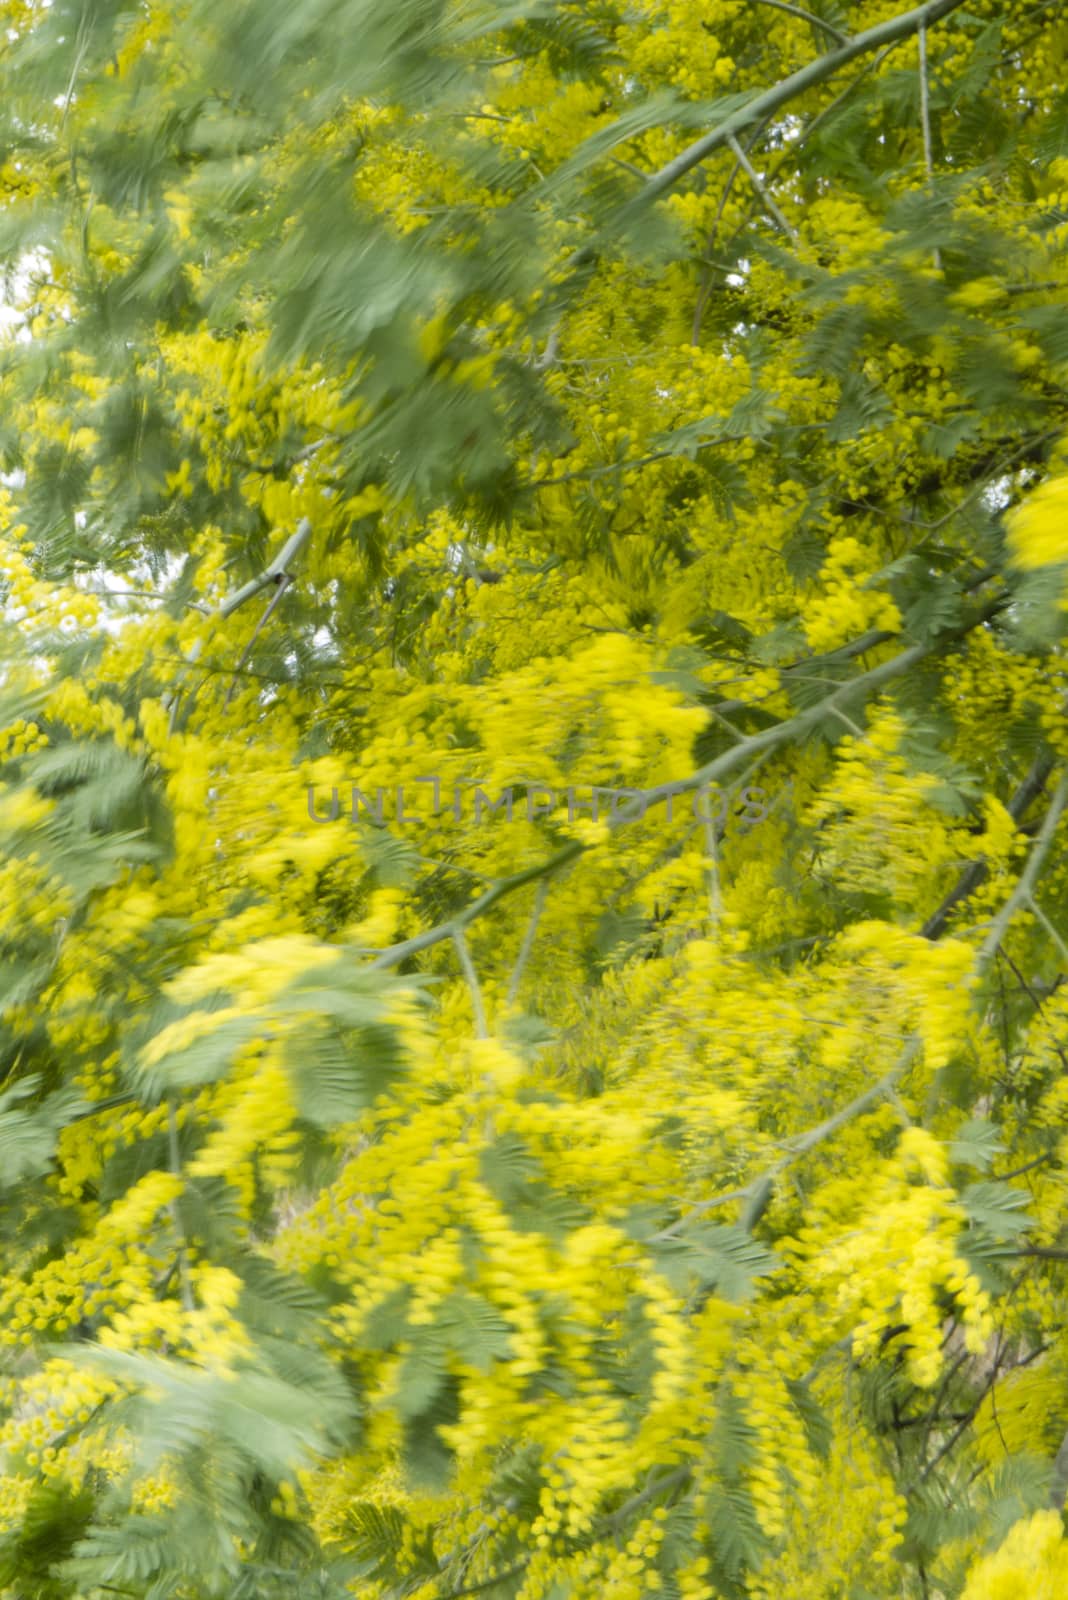 Mimosa, silver blue wattle, Acacia dealbata tree with yellow flowers in full bloom in Spring.